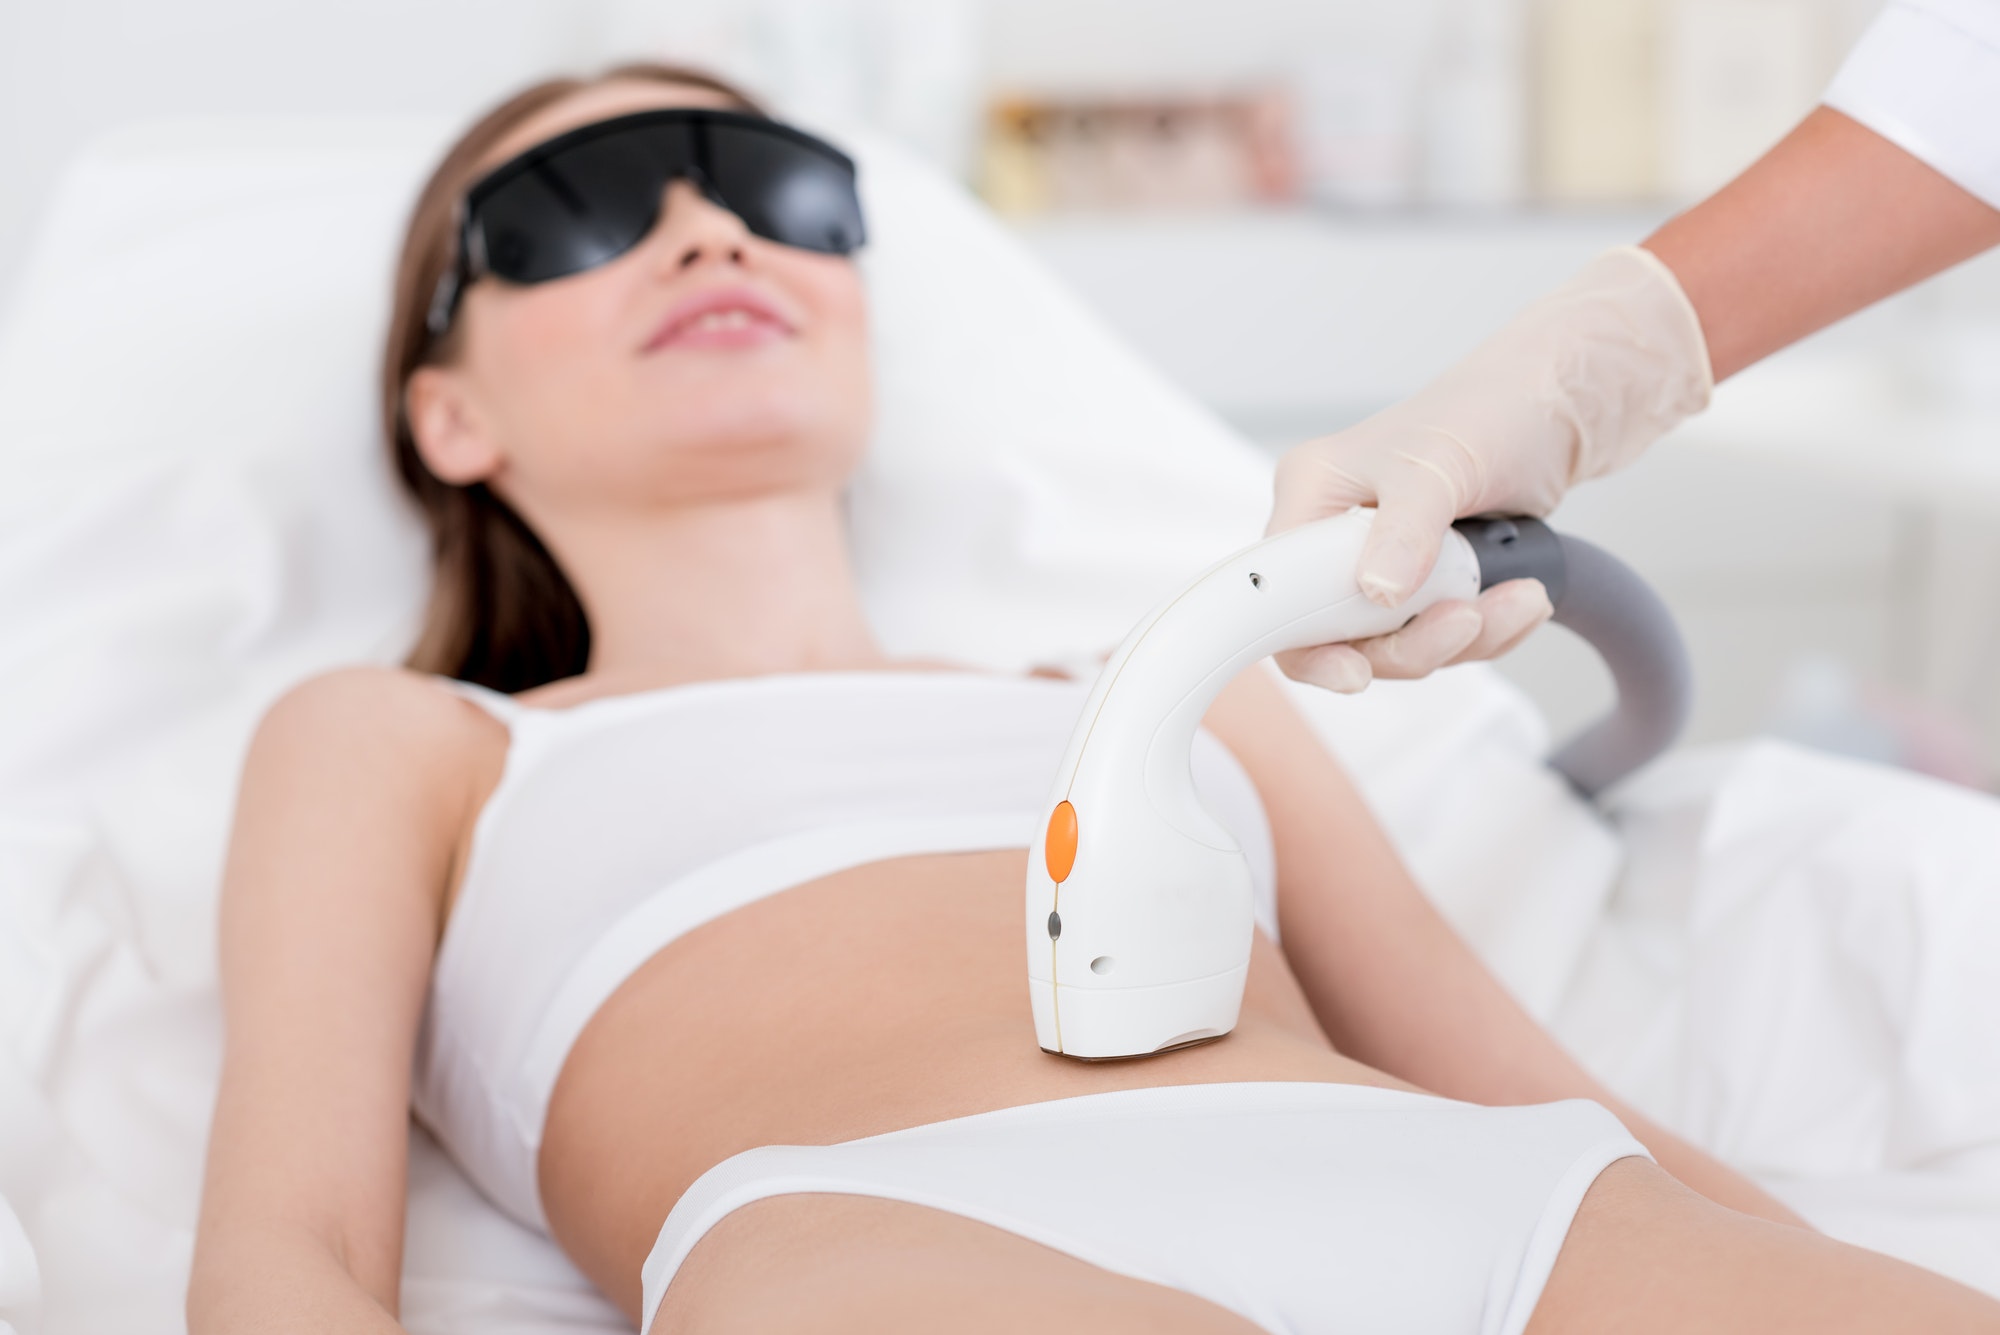 woman in underwear receiving laser hair removal procedure on stomach on salon